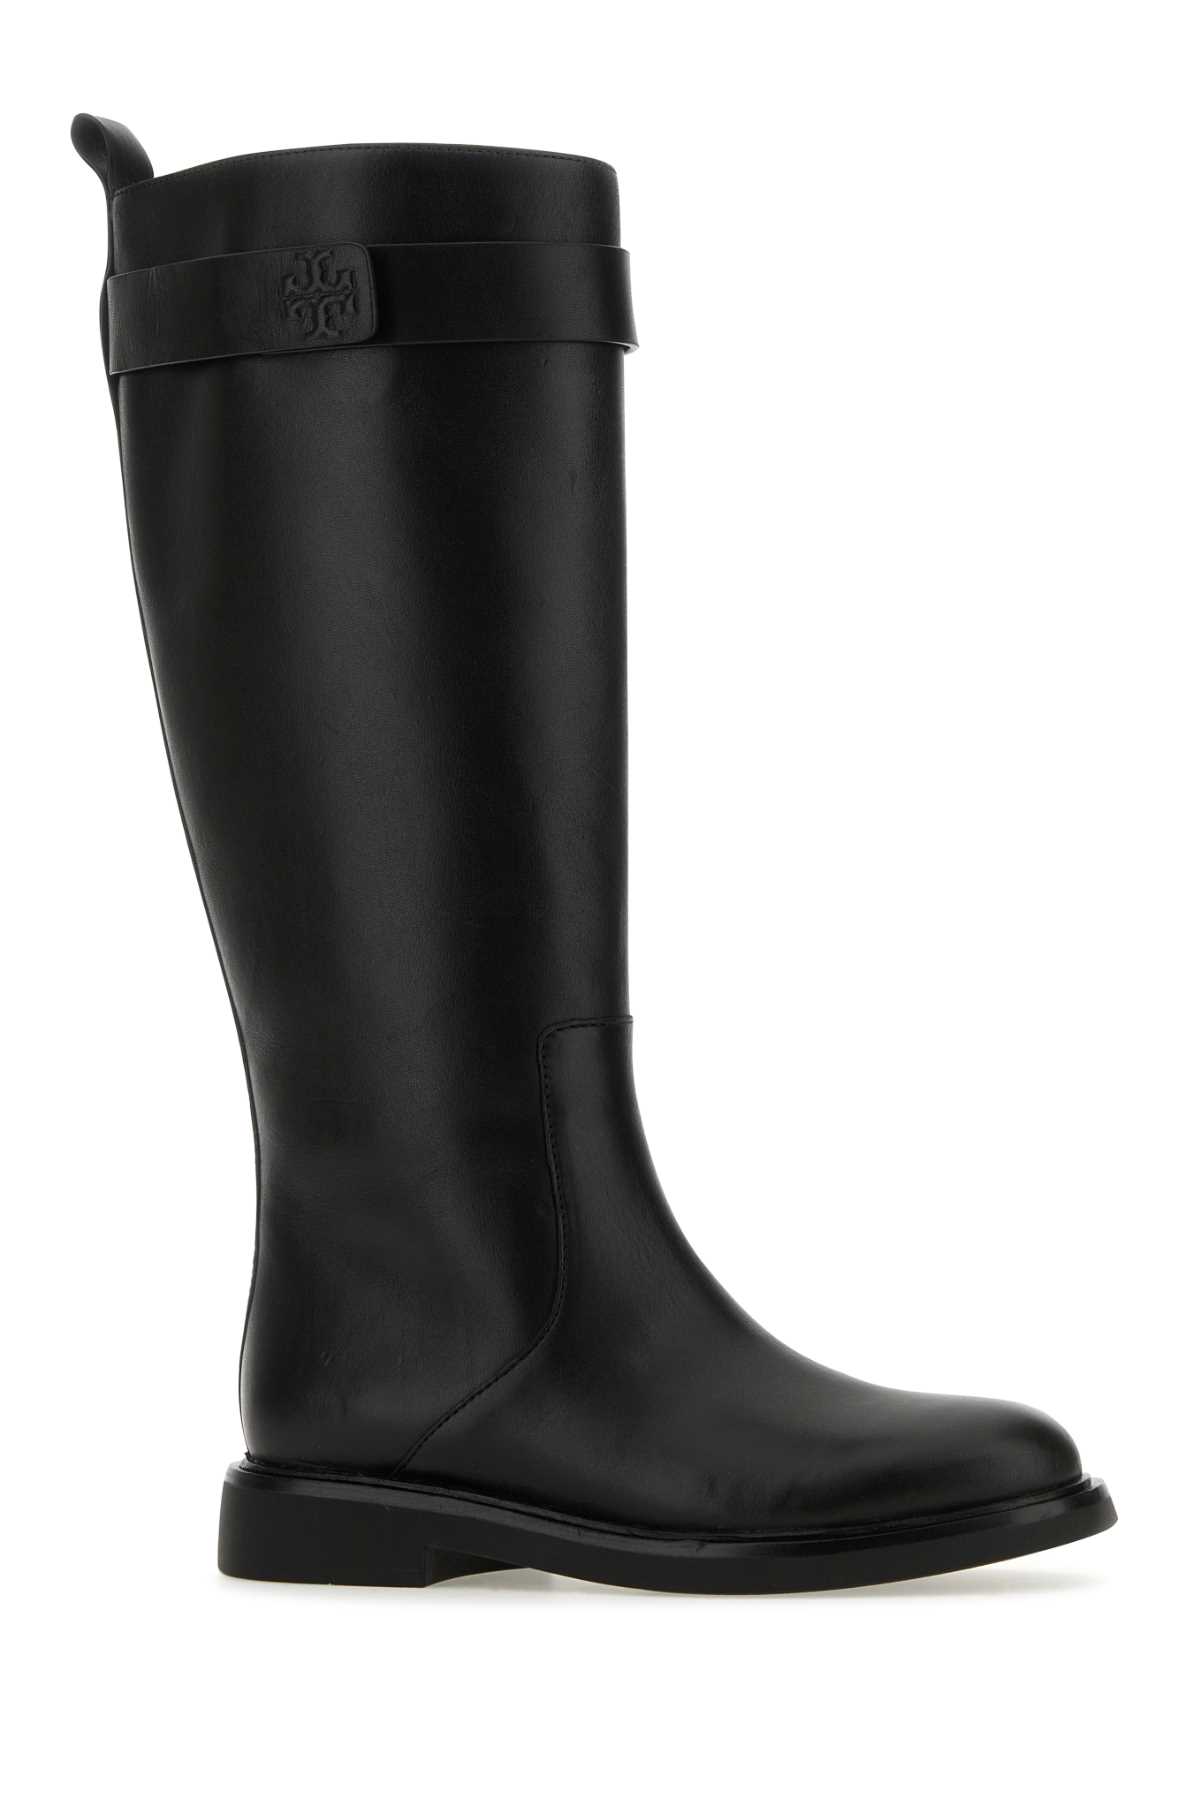 Tory Burch Black Leather Utility Boots In Perfectblackperfectblack